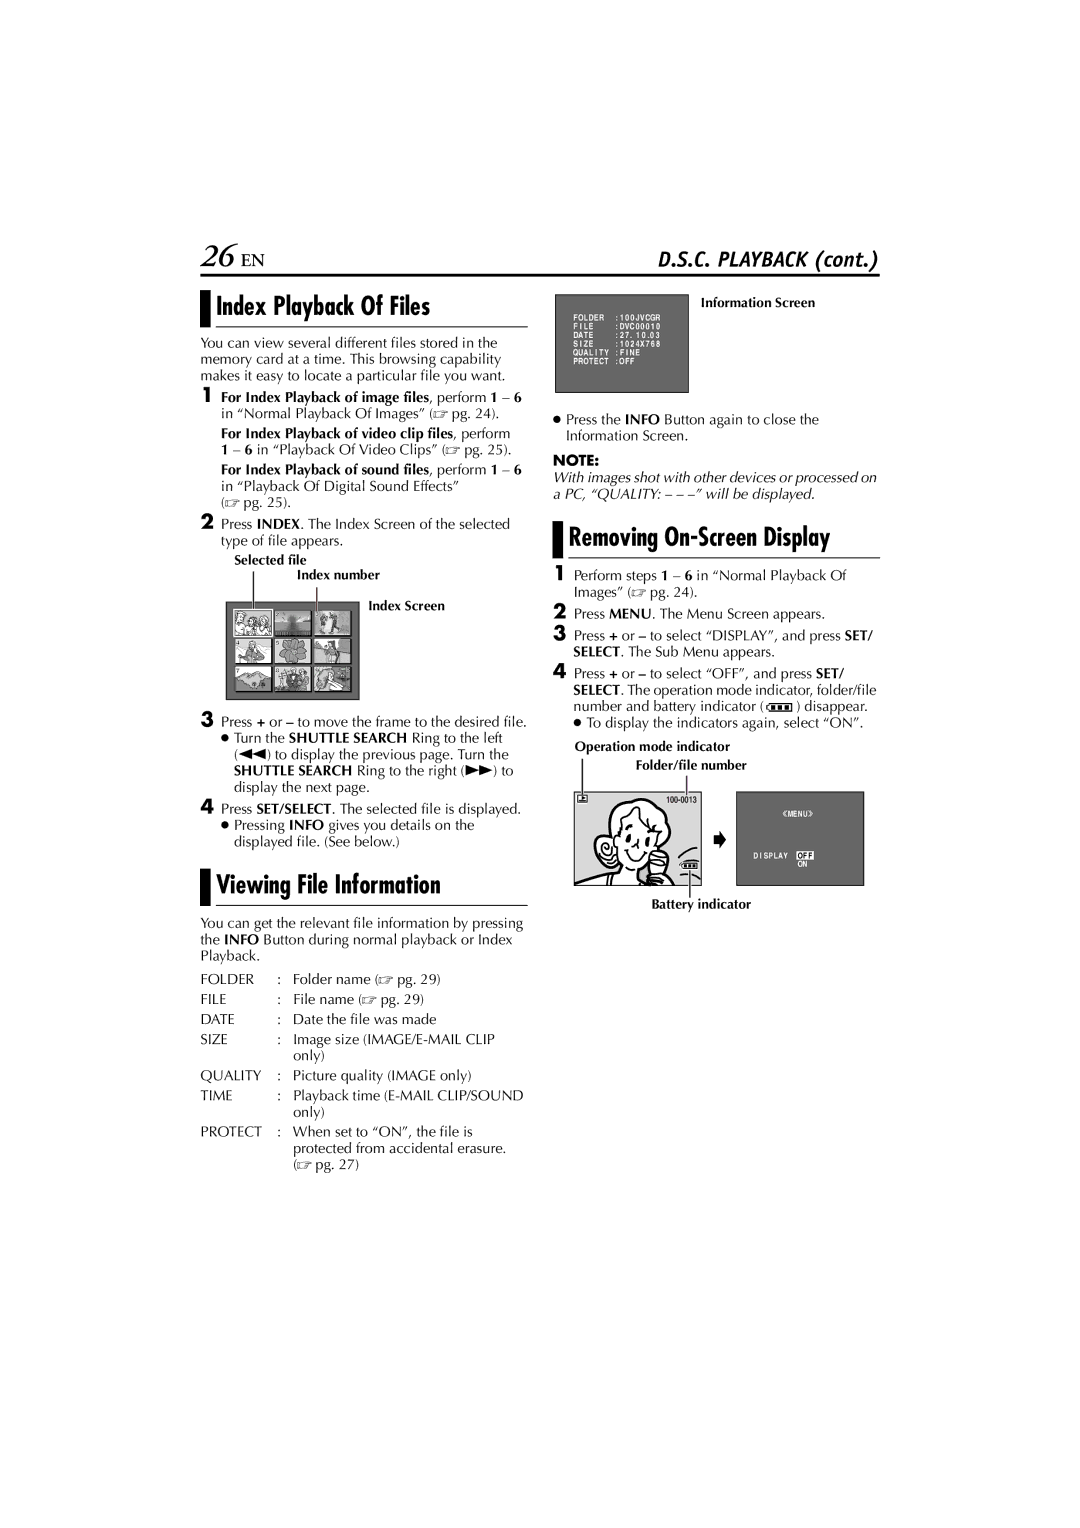 JVC LYT1147-001A 26 EN, Index Playback Of Files, Viewing File Information, For Index Playback of video clip files, perform 